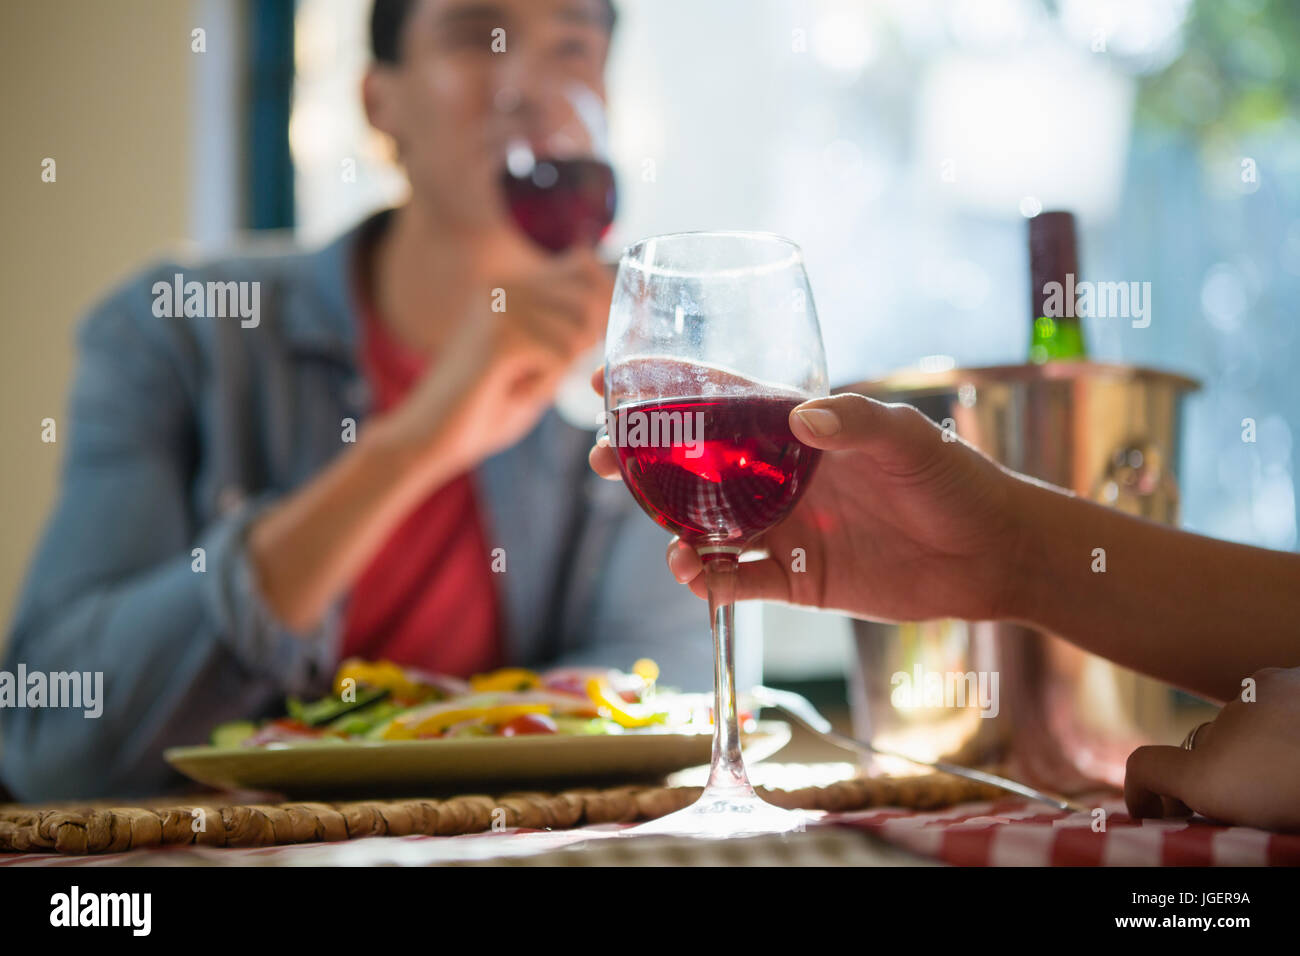 Cropped hand of woman with friend holding wineglass at table in restaurant Stock Photo